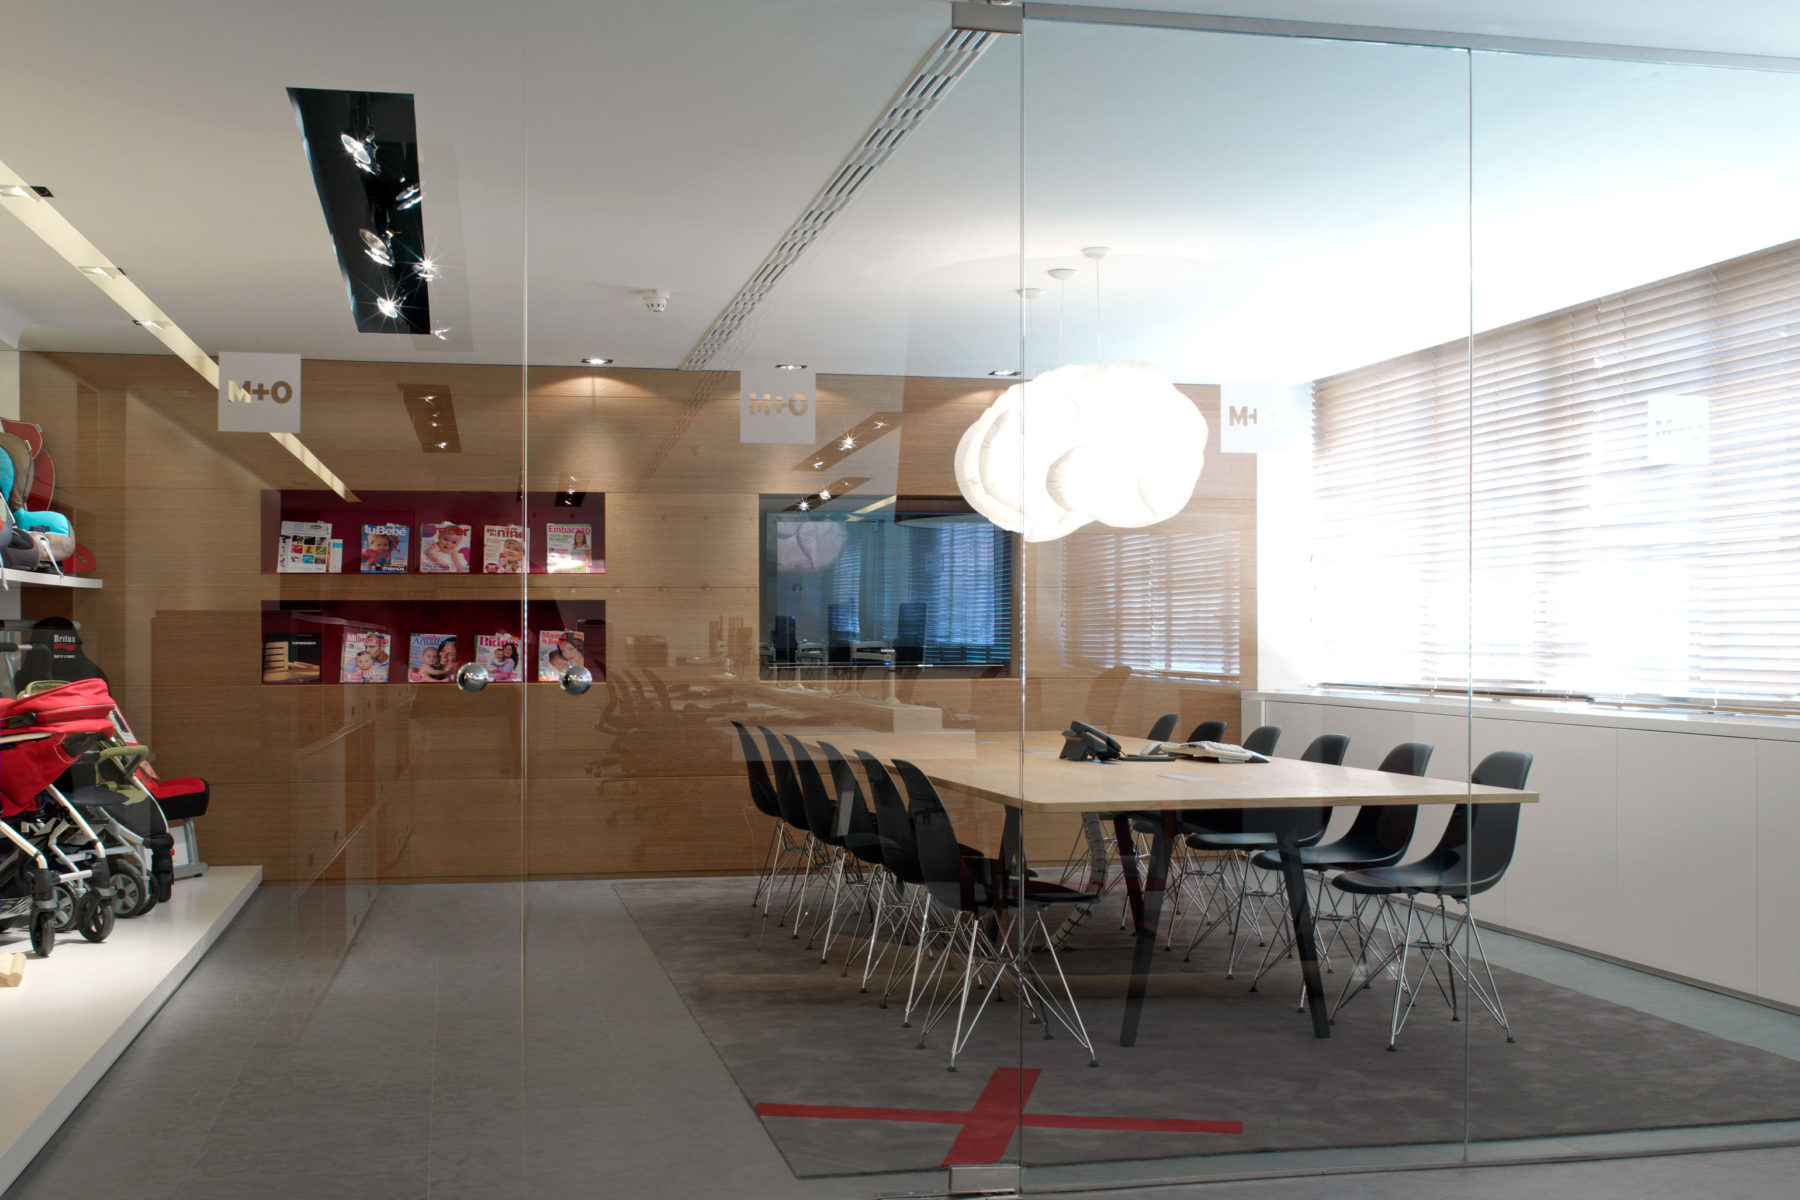 M+O Offices, Barcelona